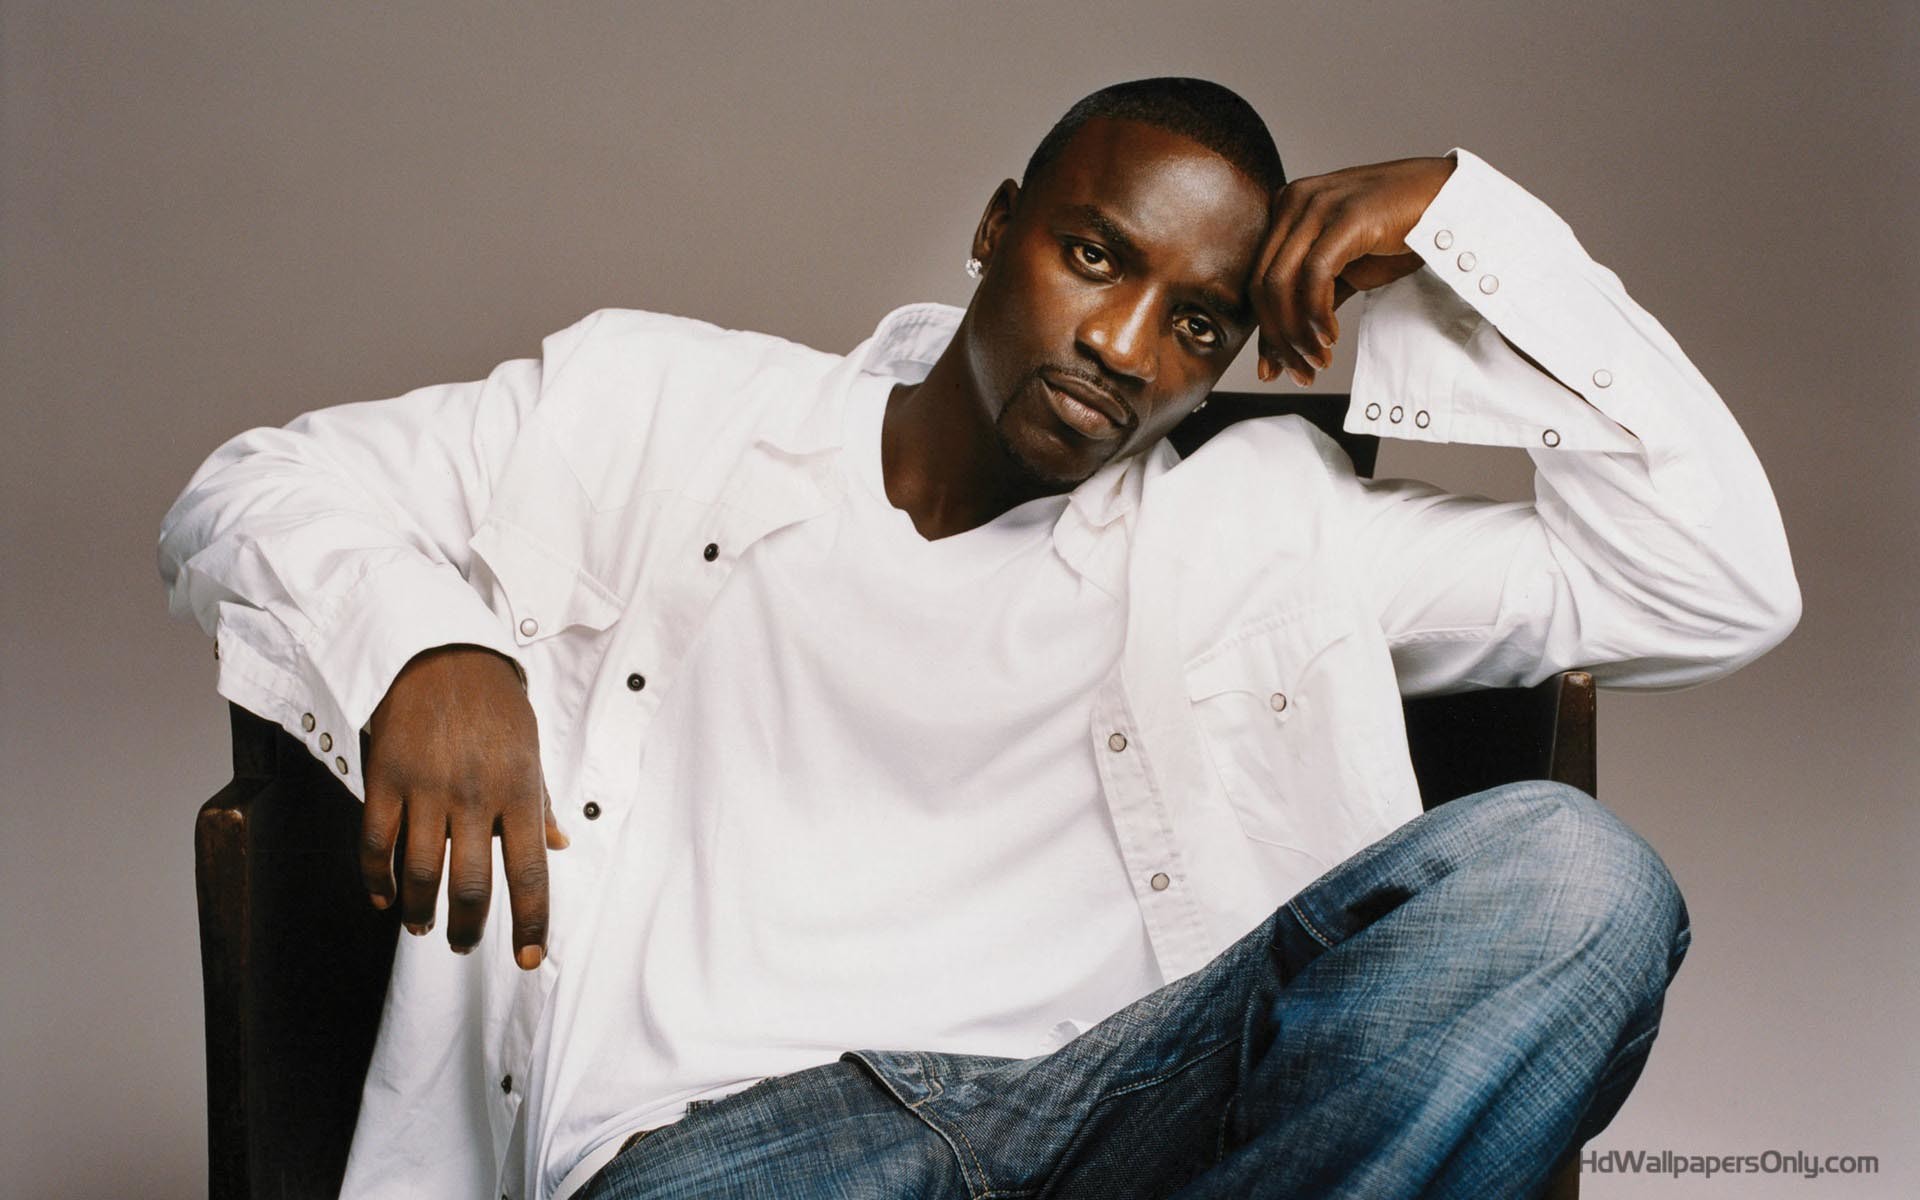 1920x1200 Akon HD Wallpapers 1080p - HD Wallpapers OnlyHD Wallpapers Only